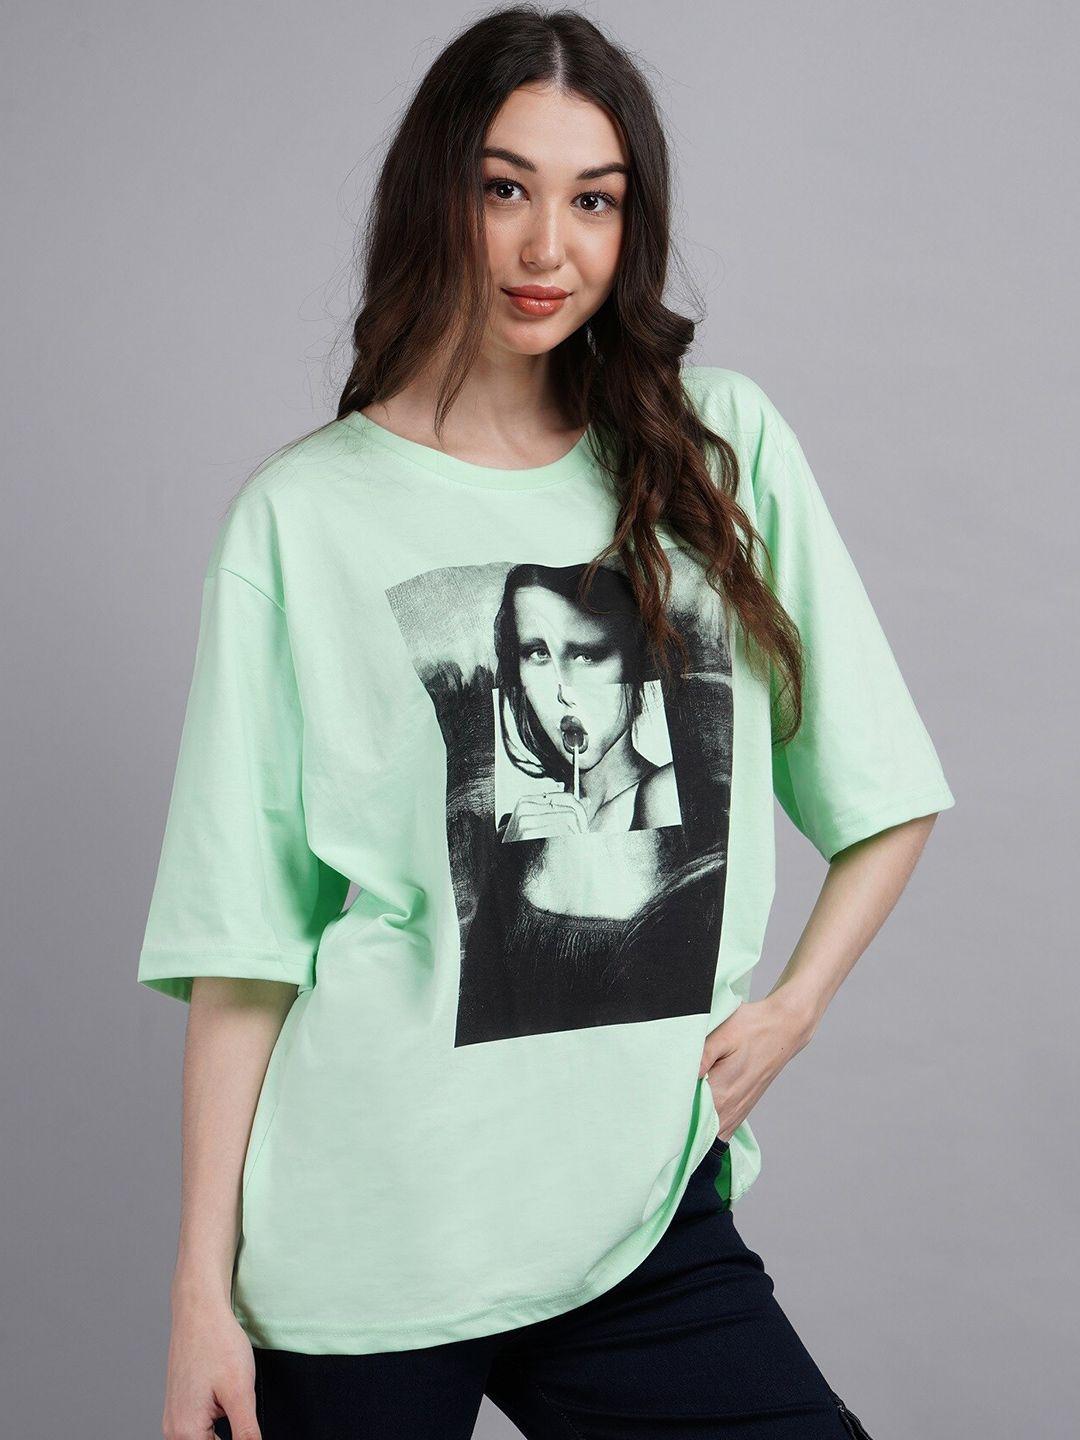 absolute defense printed round neck cotton oversized t shirt